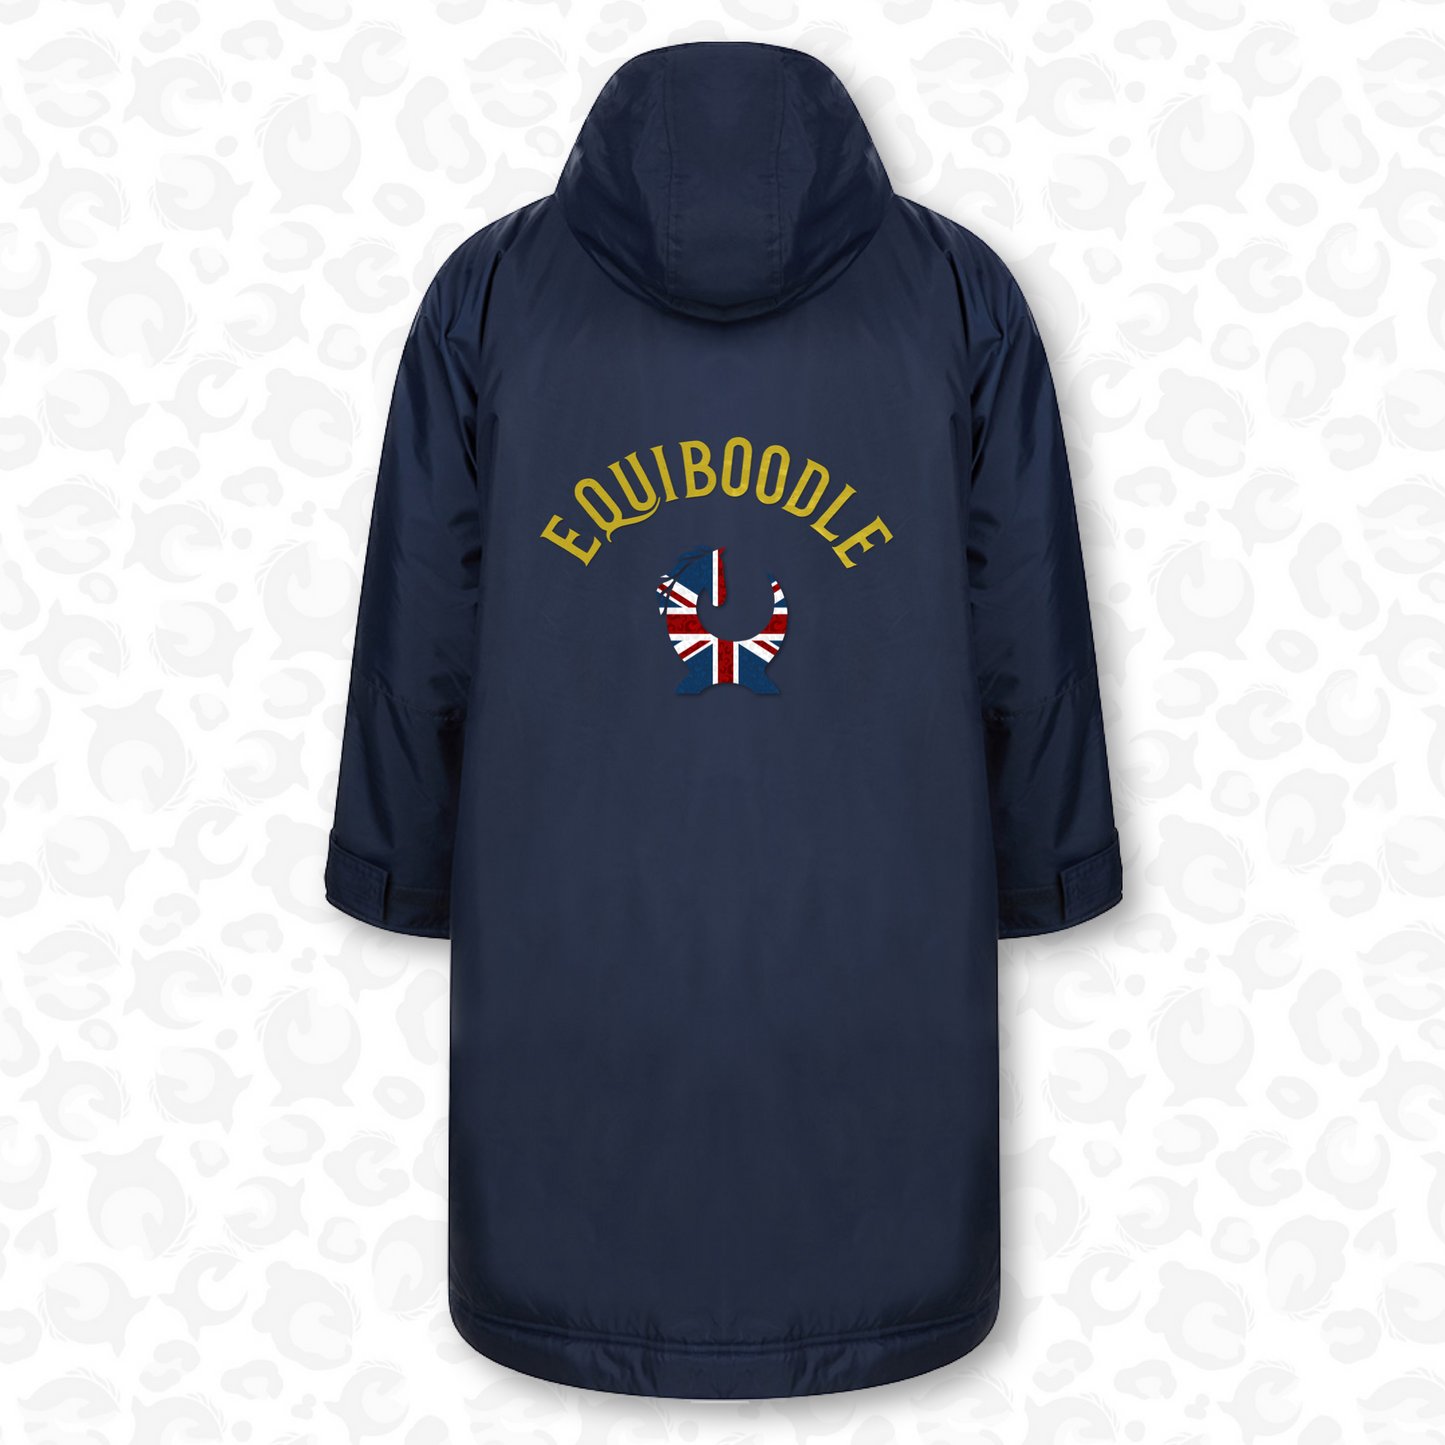 Equiboodle Ringside Robe Navy/Gold One Size